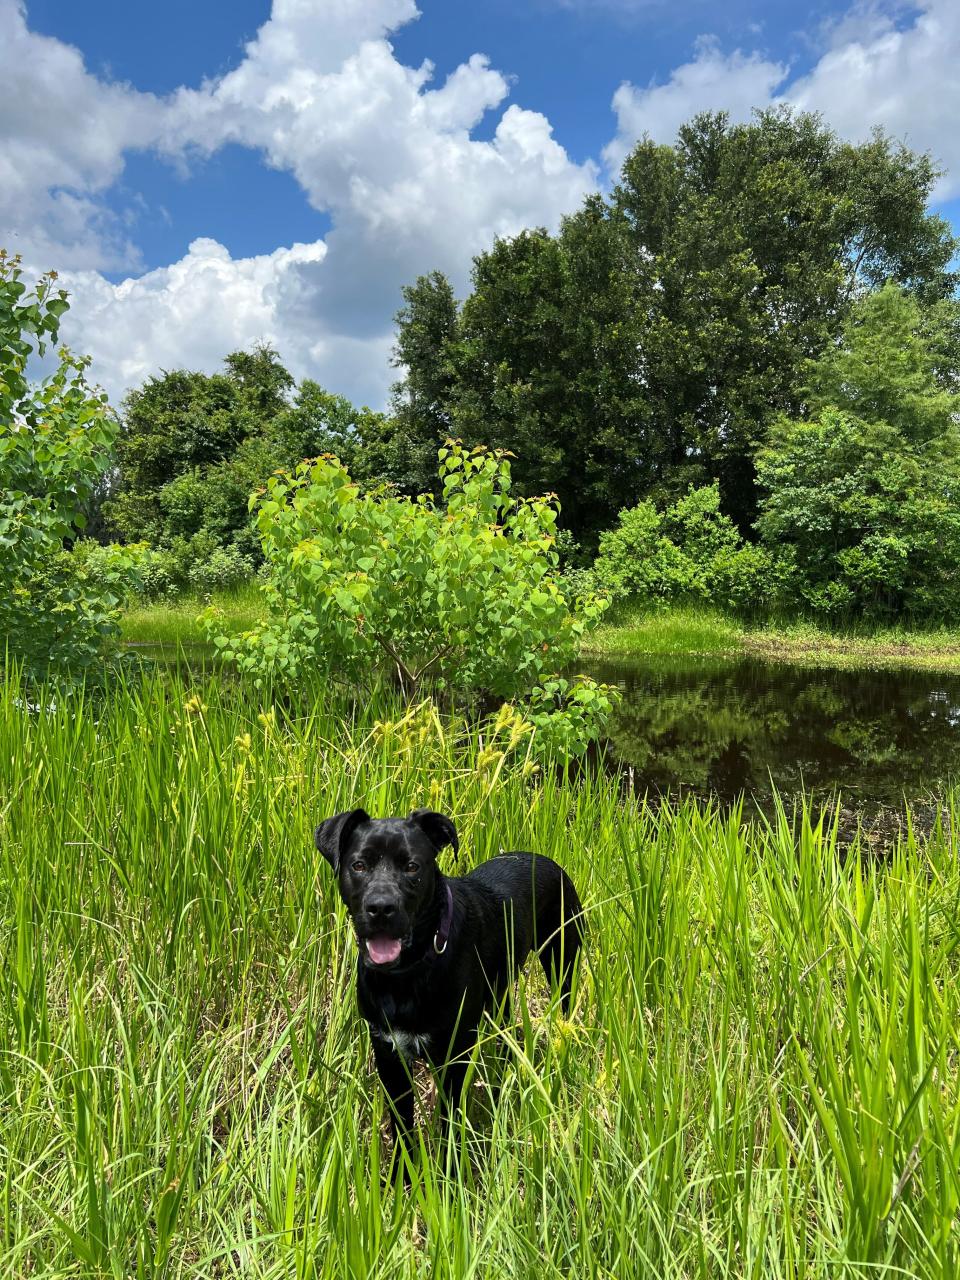 Toby, pictured here, was eaten by an alligator at the J. R. Alford Greenway Trail on June 6.